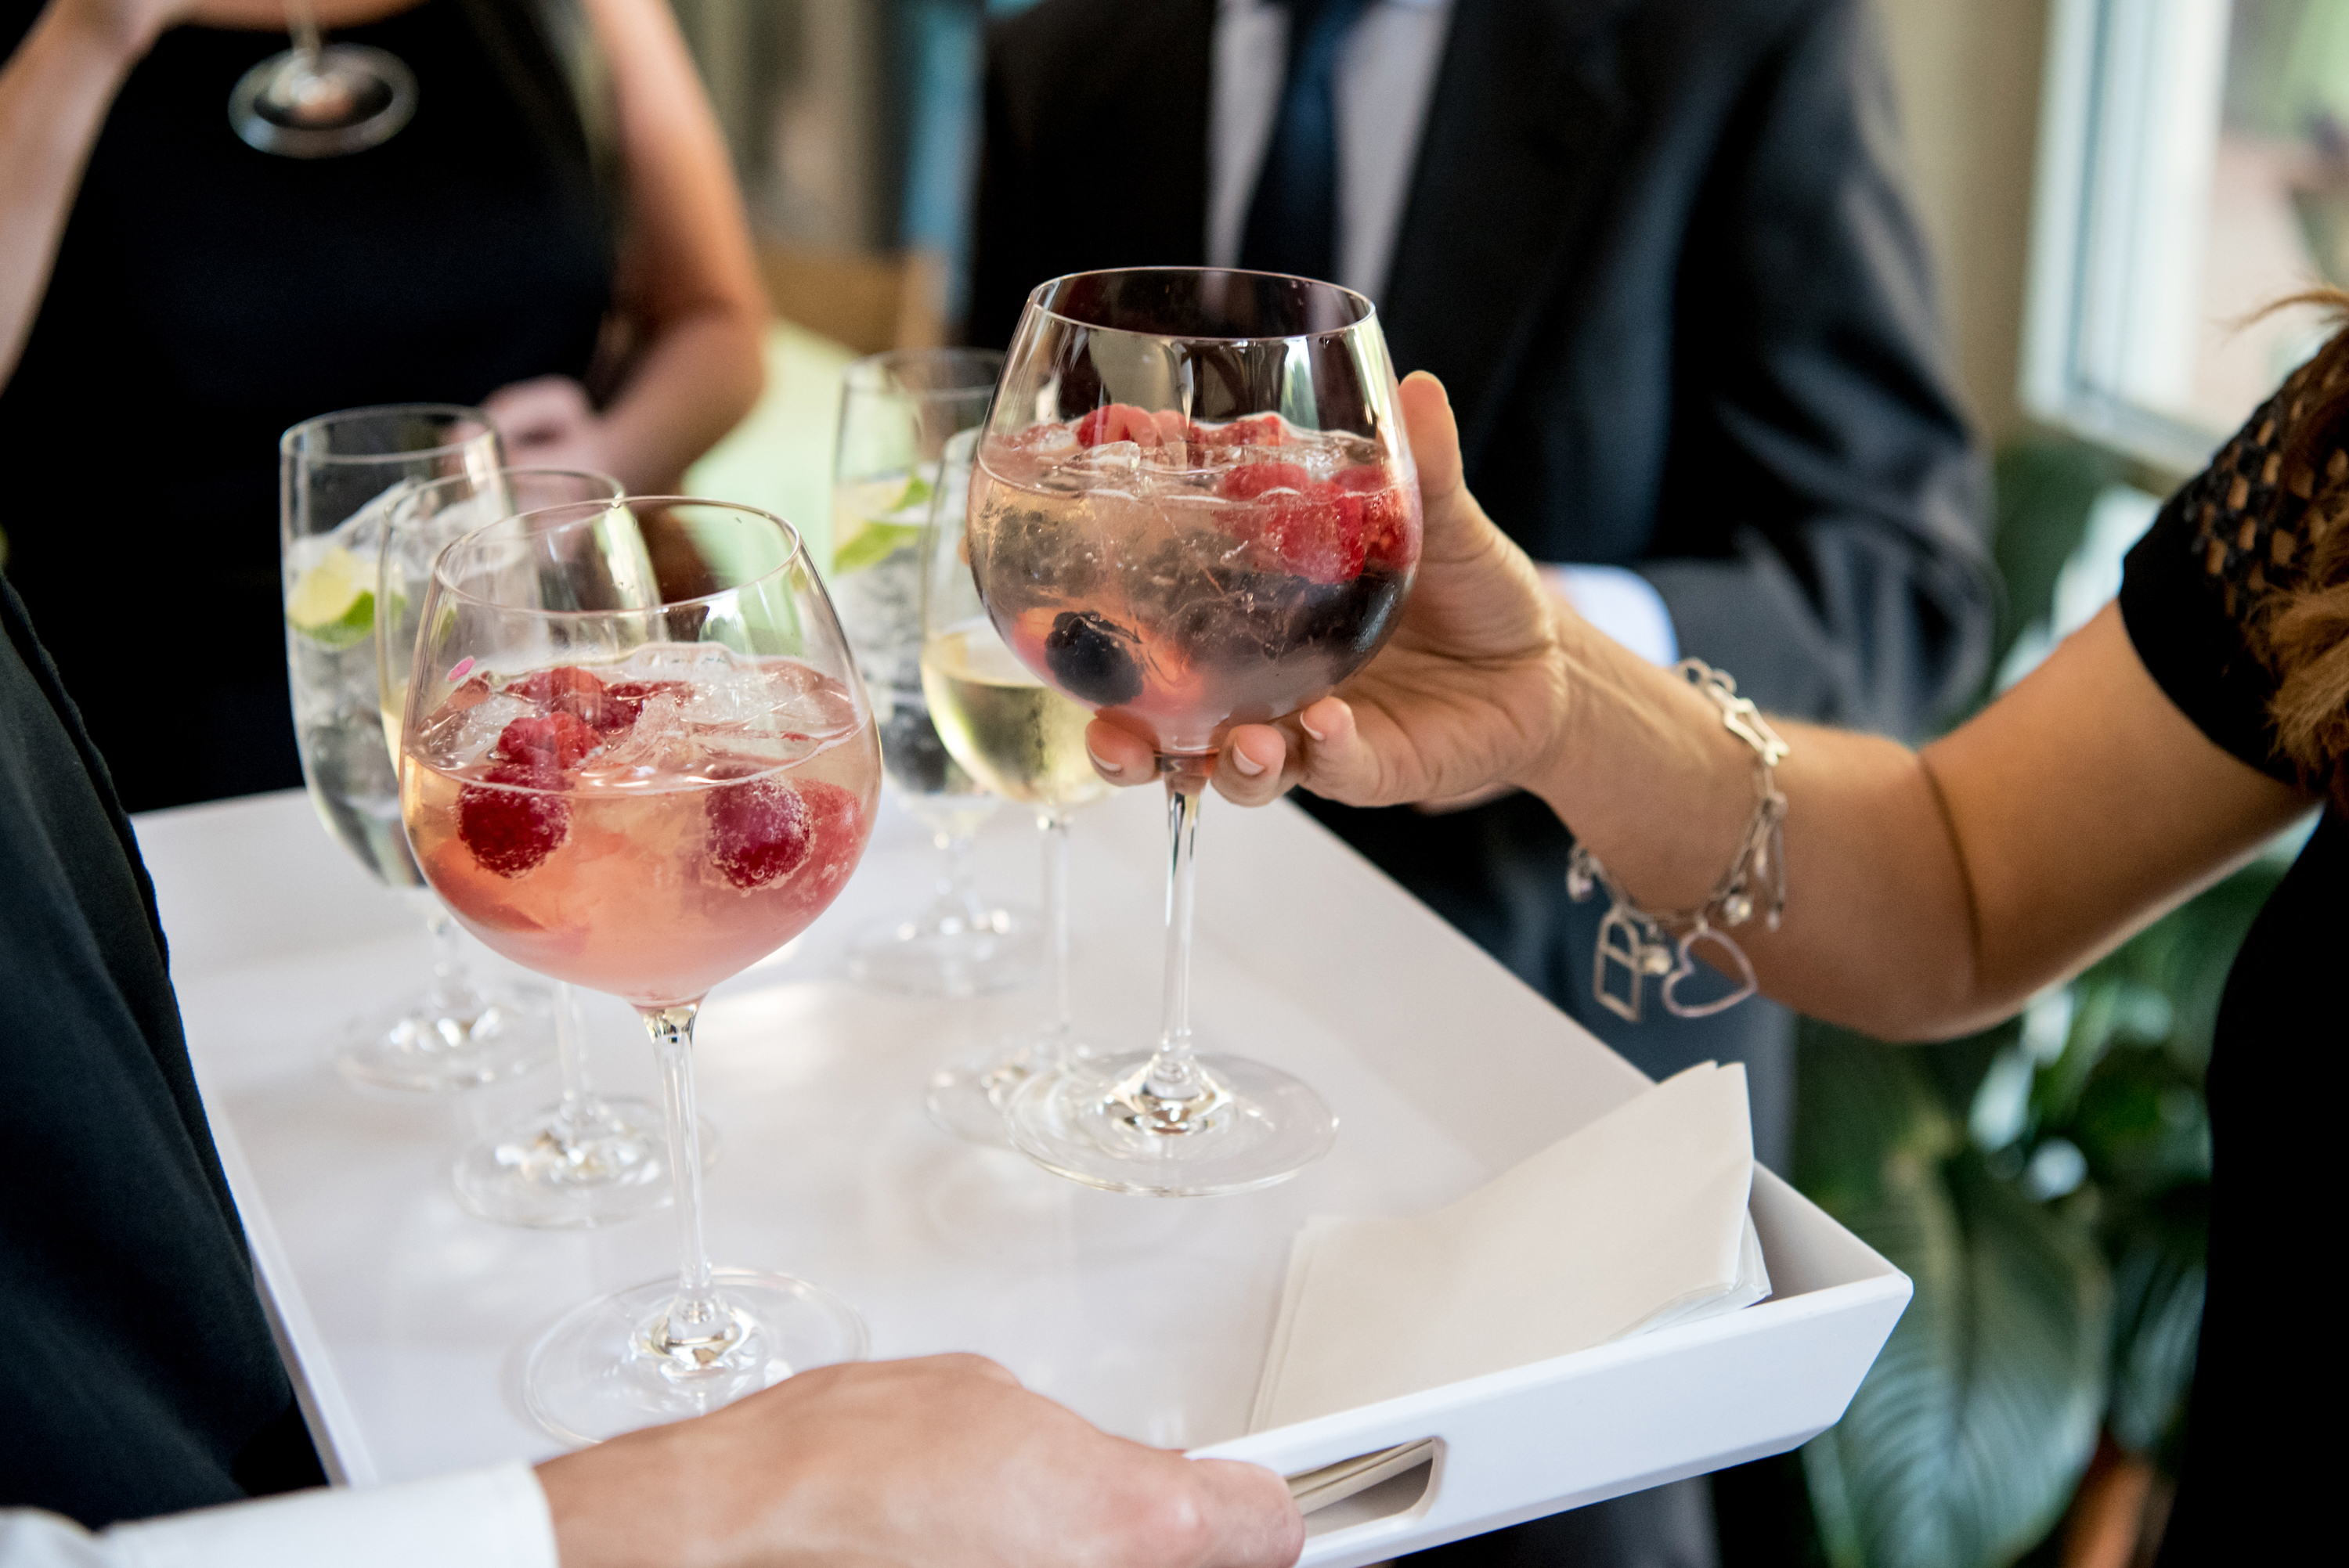 Summer Berry Sangria for Camp Color War Bat Mitzvah at Temple Rodef Shalom in Falls Church, VA | Pop Color Events | Adding a Pop of Color to Bar & Bat Mitzvahs in DC, MD & VA | Photo by Greg Land Photography